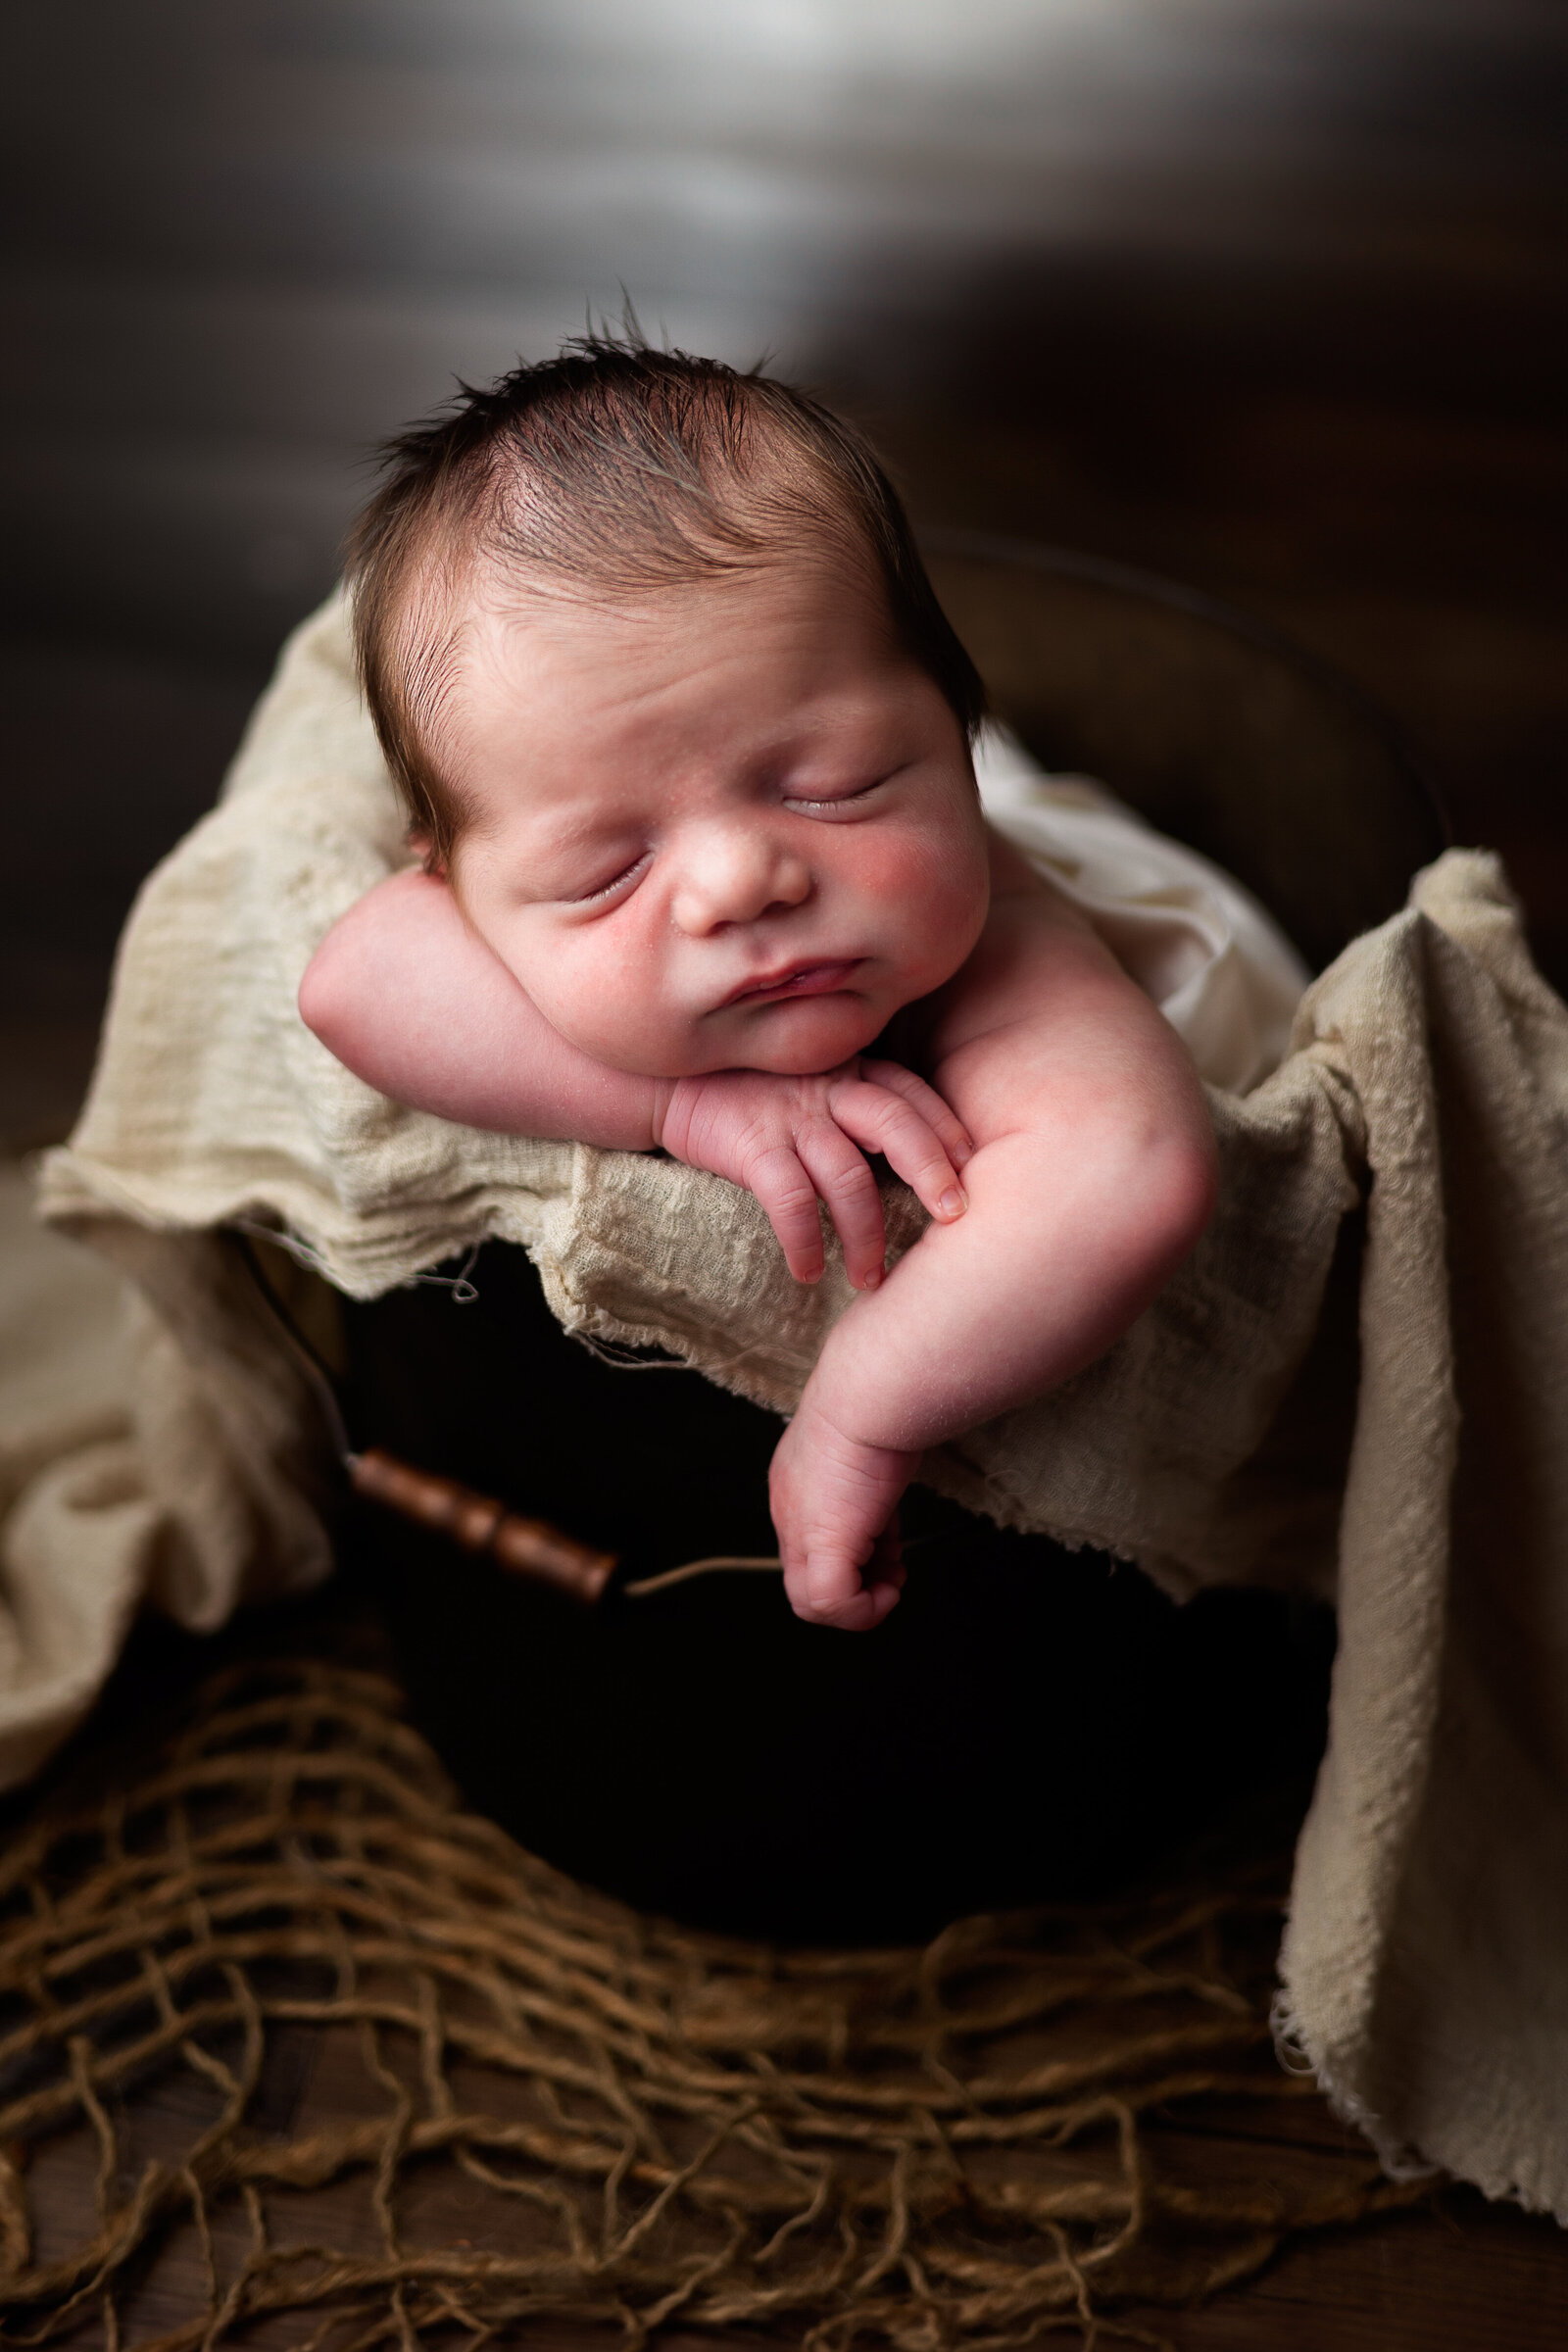 Newborn baby boy sleeping soundly while posed in a  brown bucket